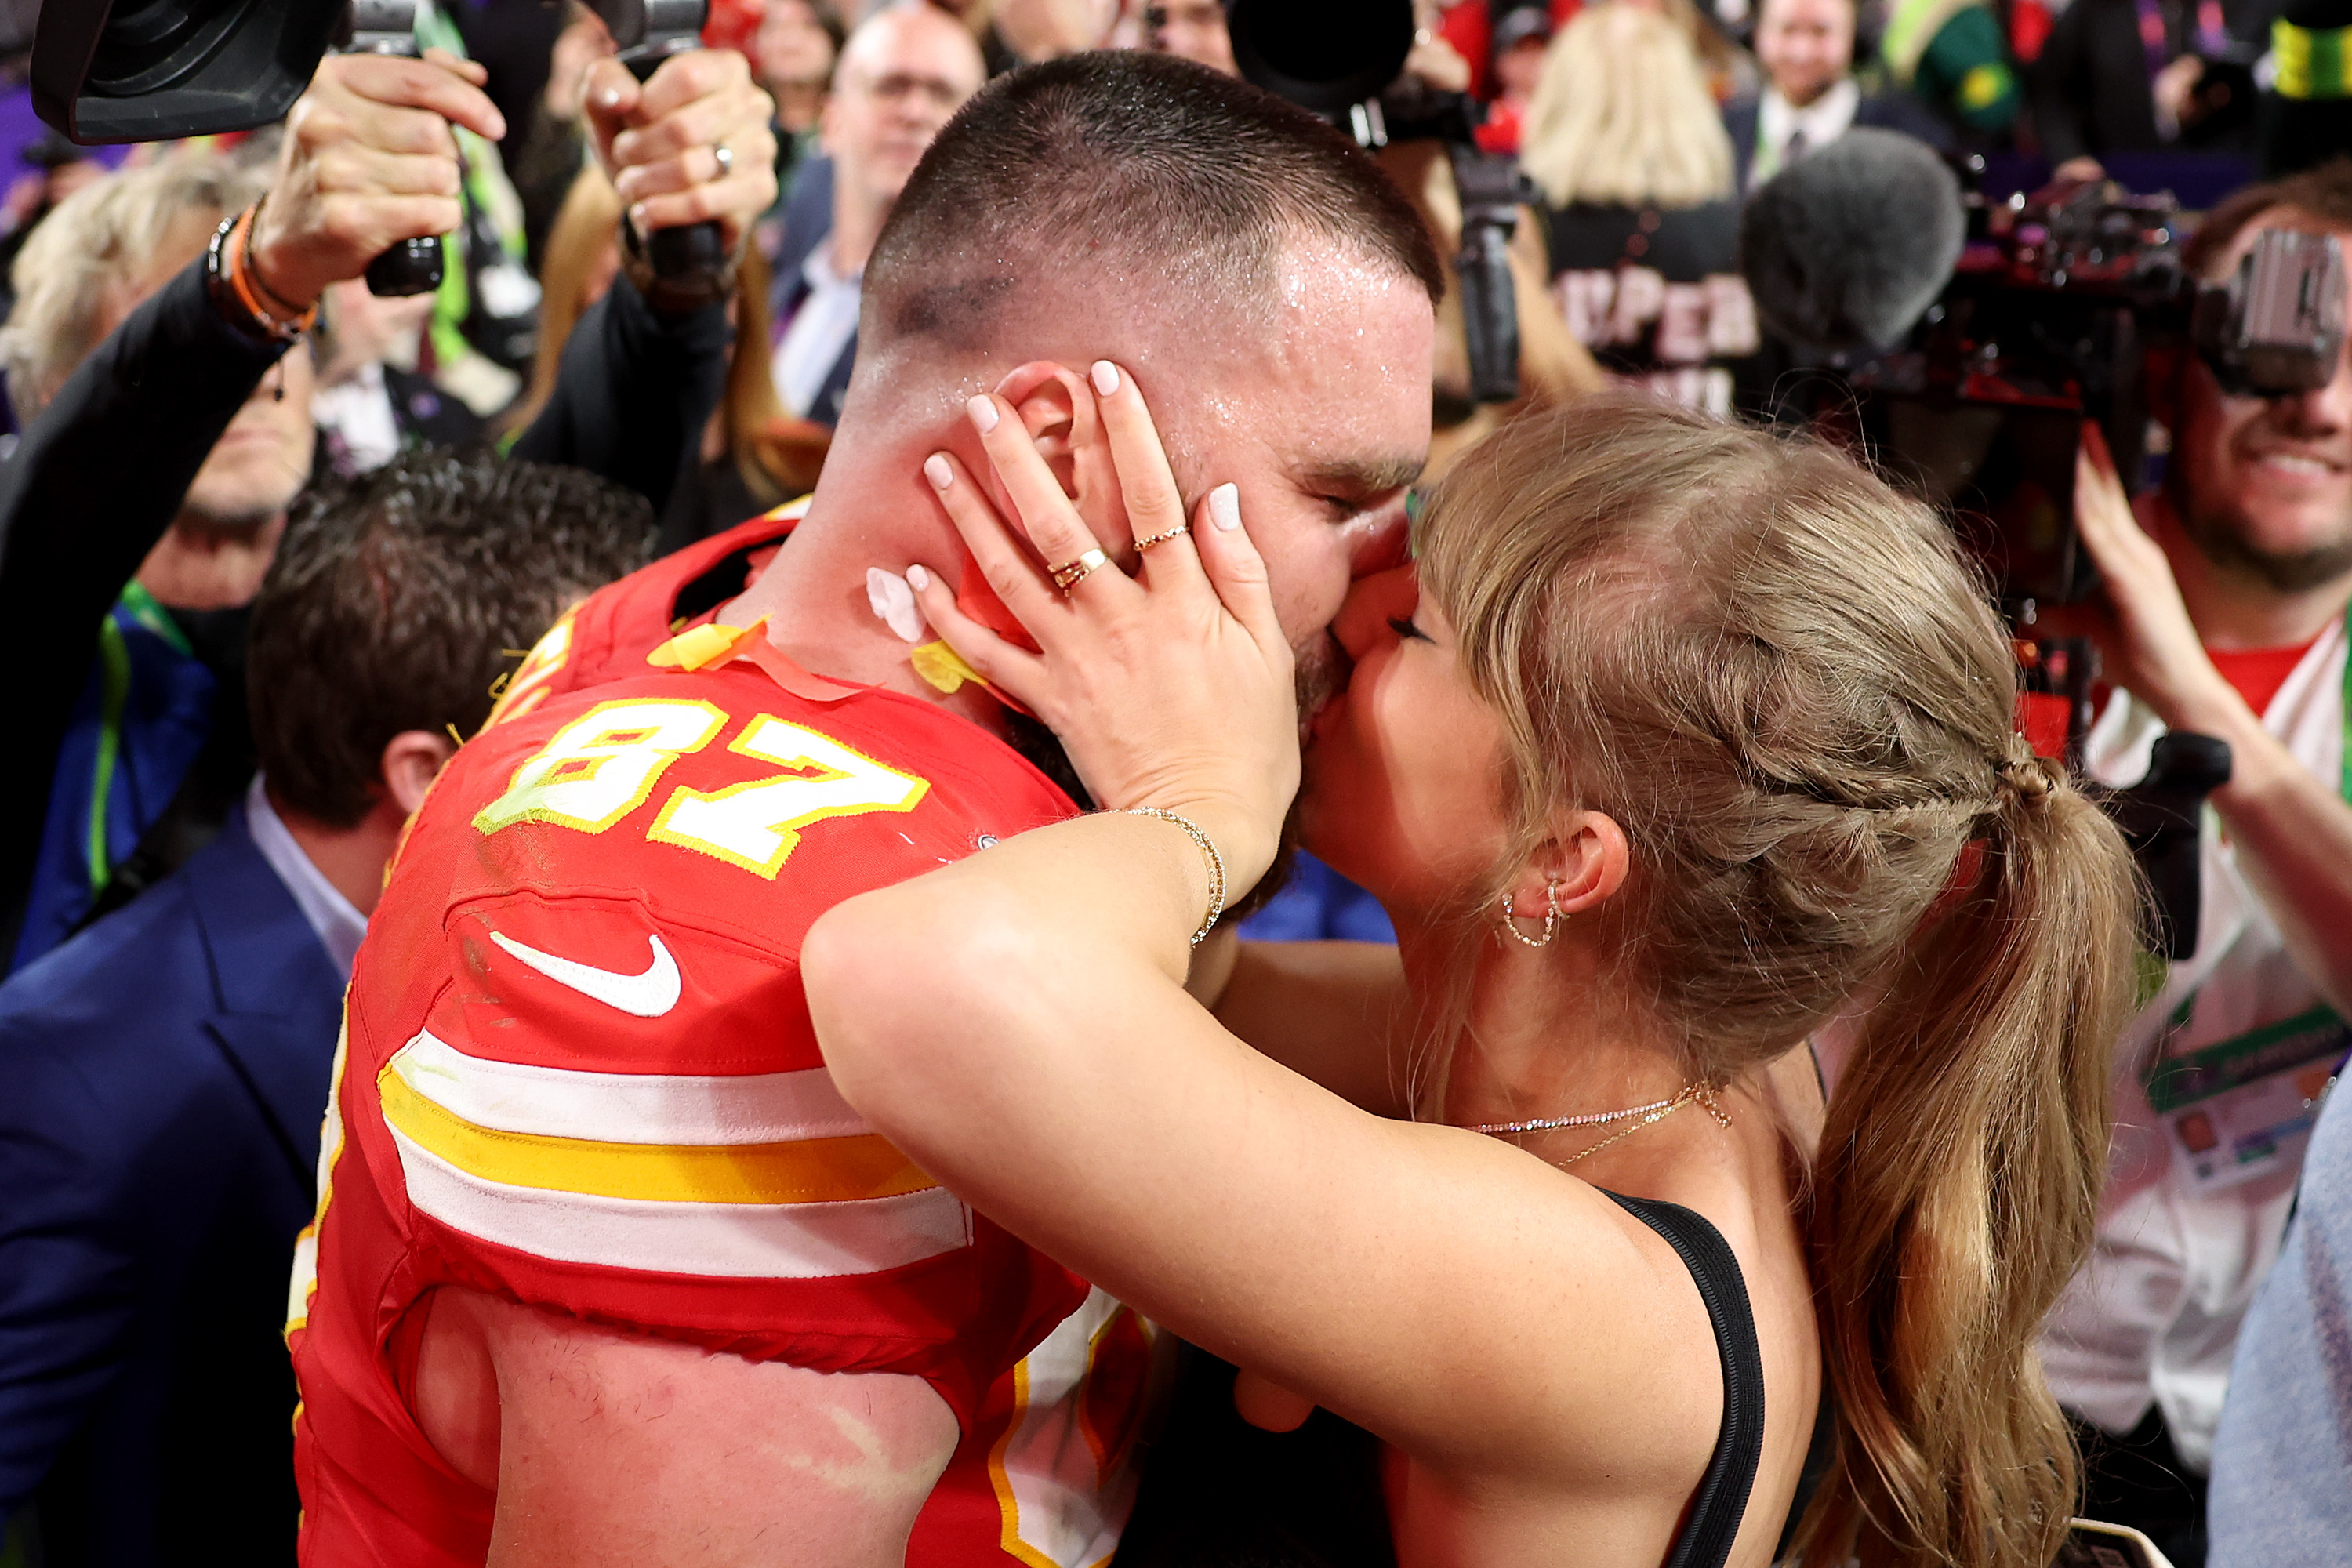 Person in a sports jersey number 87 shares a kiss with a person amidst a crowd with cameras